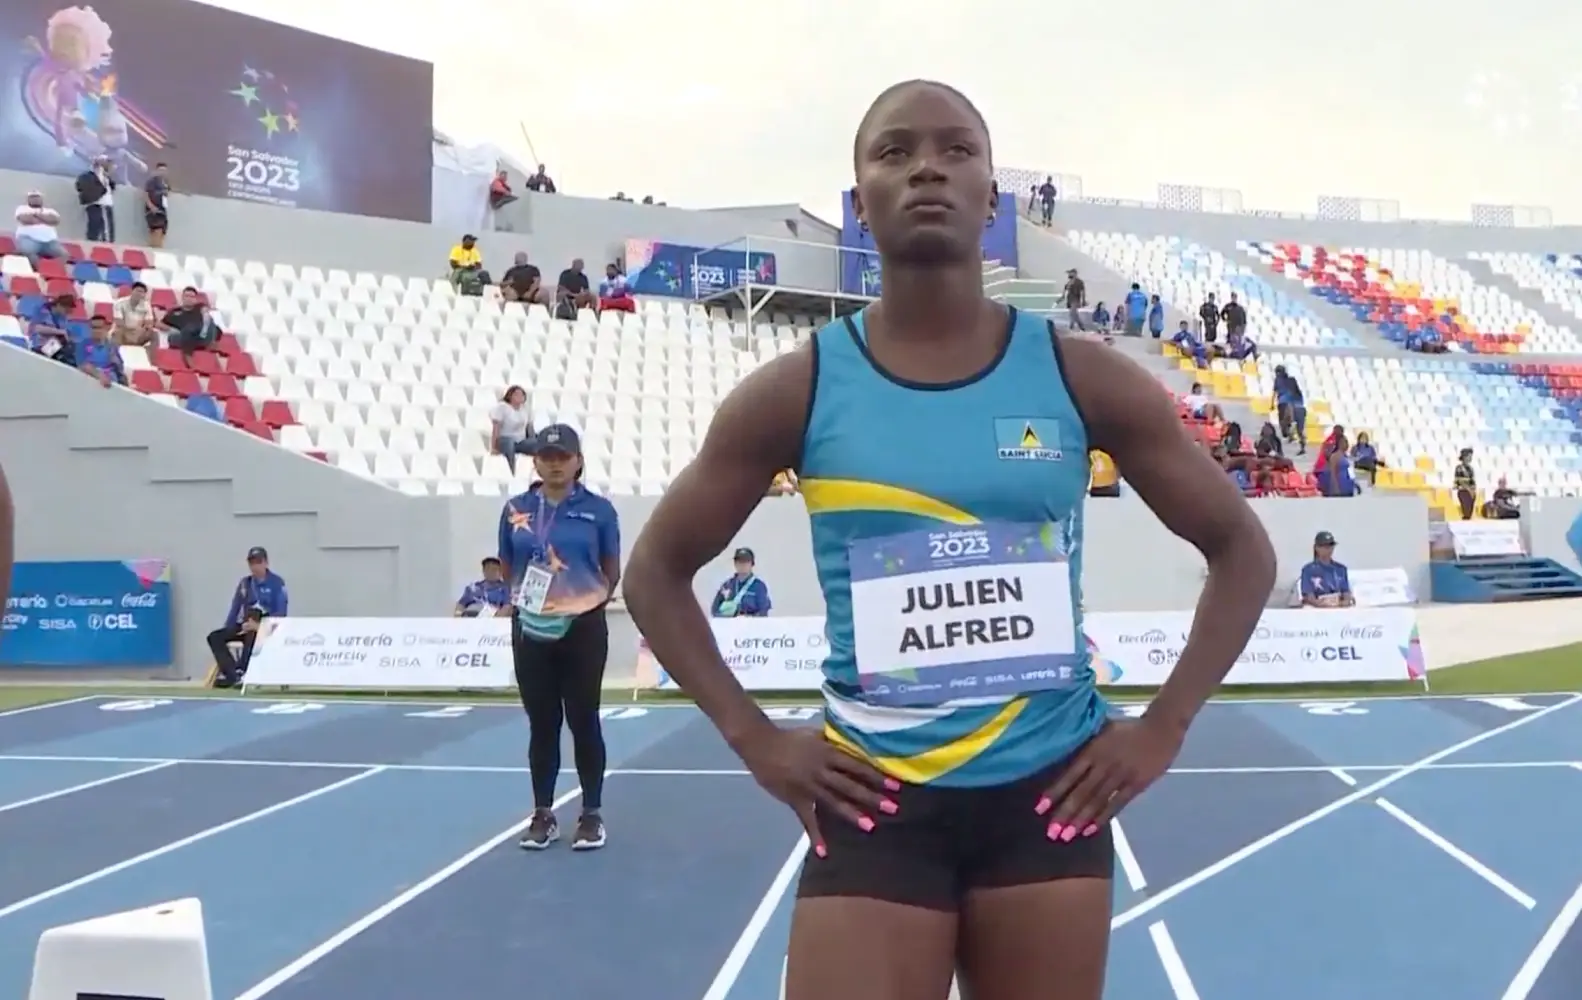 Julien Alfred at the CAC Games 2023 before the women's 100m heats